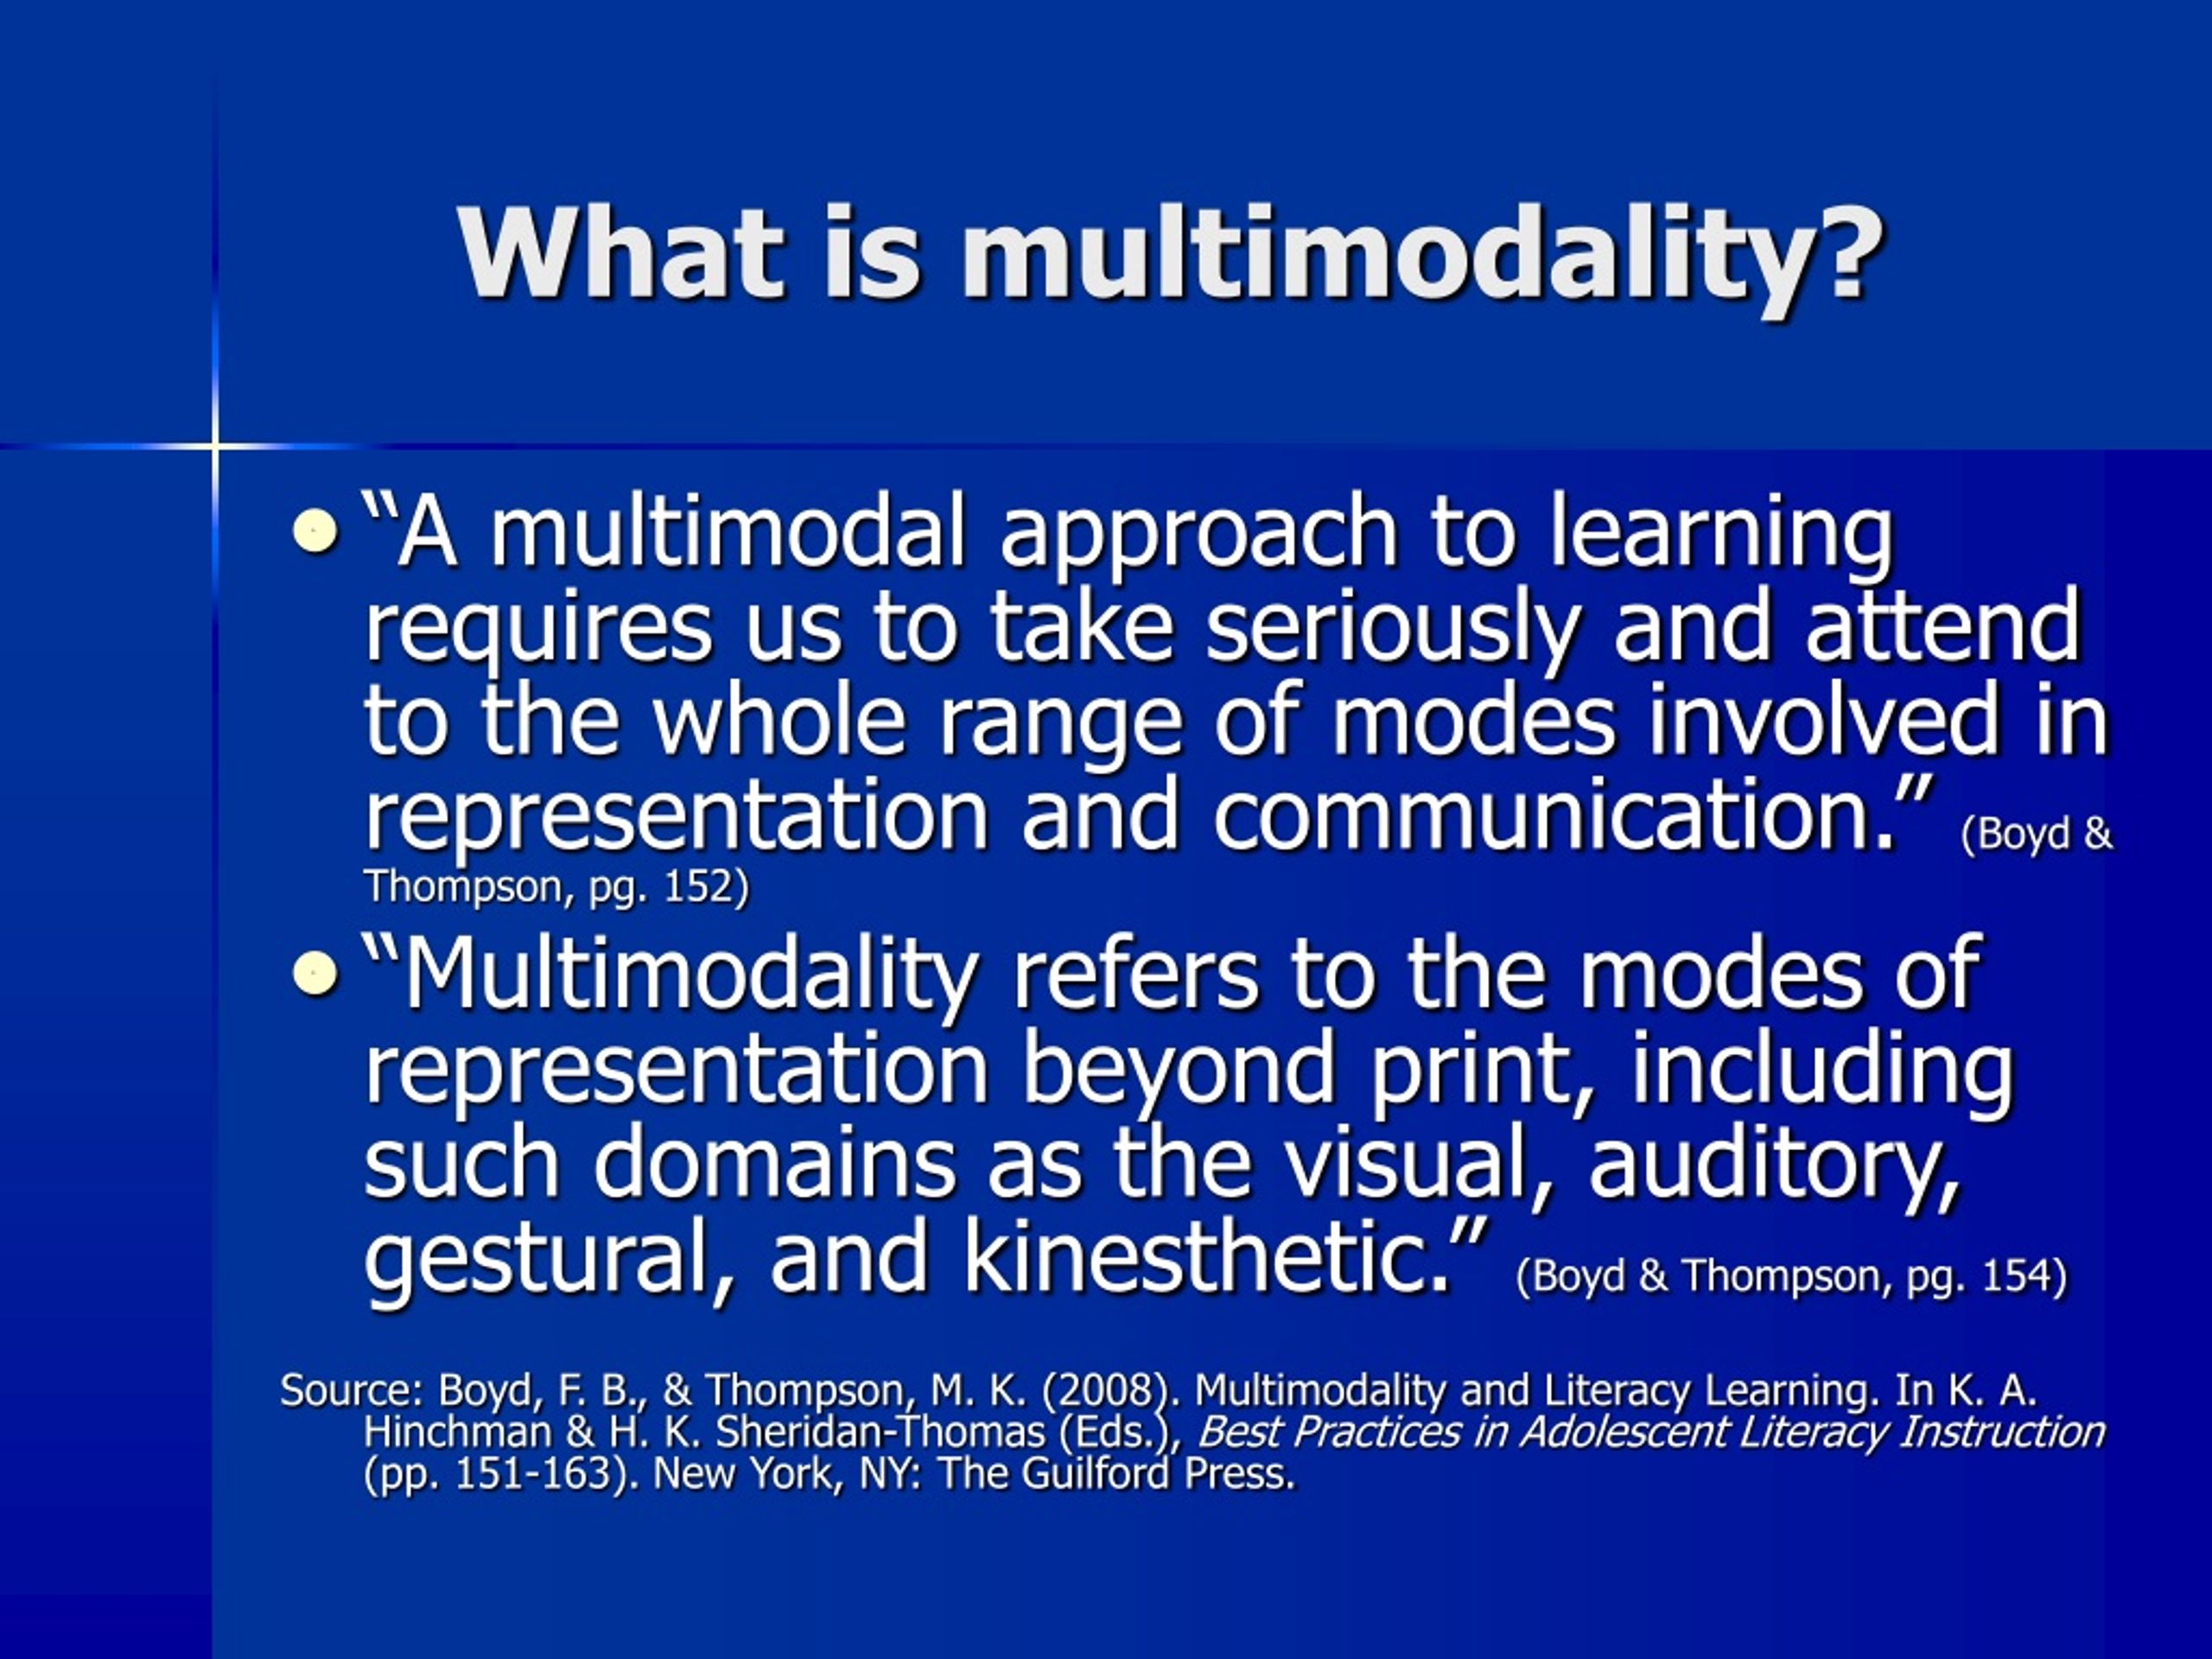 how can you define multimodal presentation